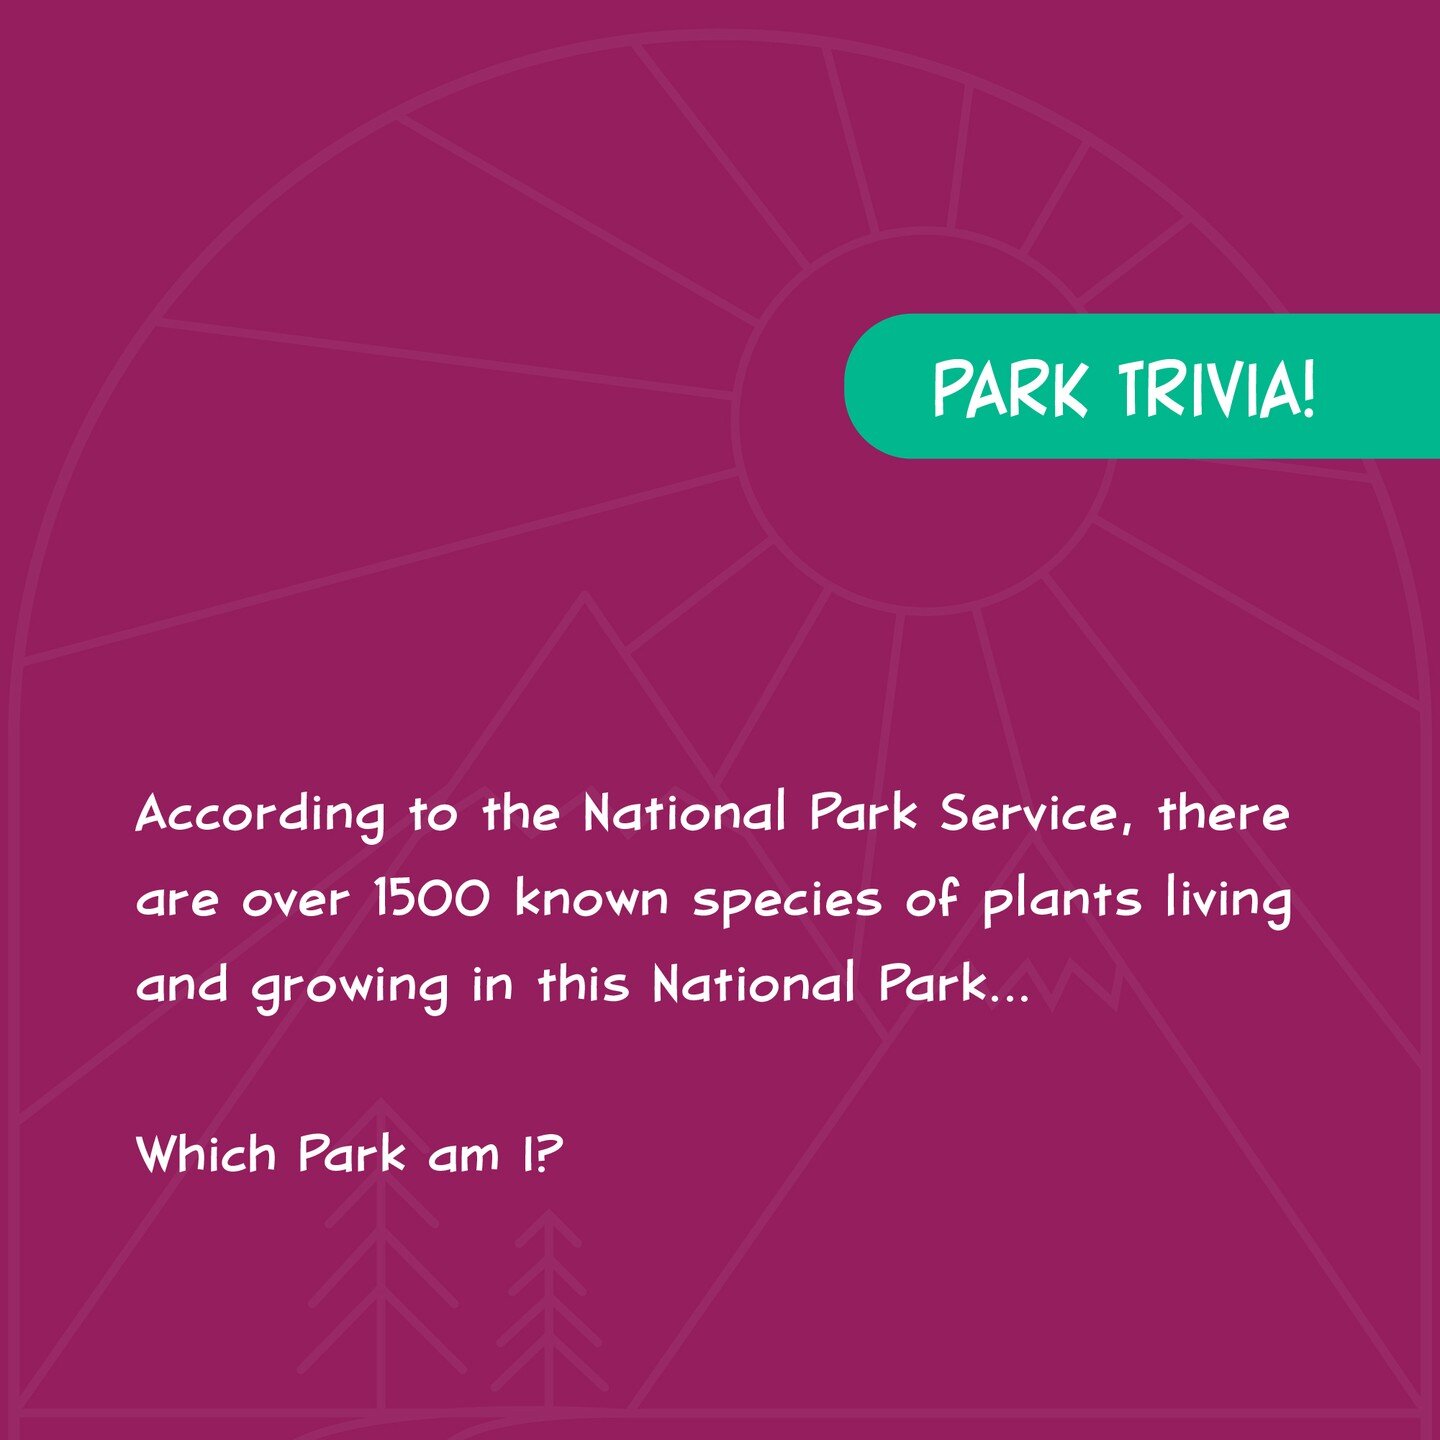 It's time for some Park Trivia!!!

This park is home to more than 1500 species of plants!! WOW!

Do you know which park it is?!?! Guess in the comments below before you swipe left to see the answer.

#ParksPublishing #NationalParks
#FindYourPark #Exp